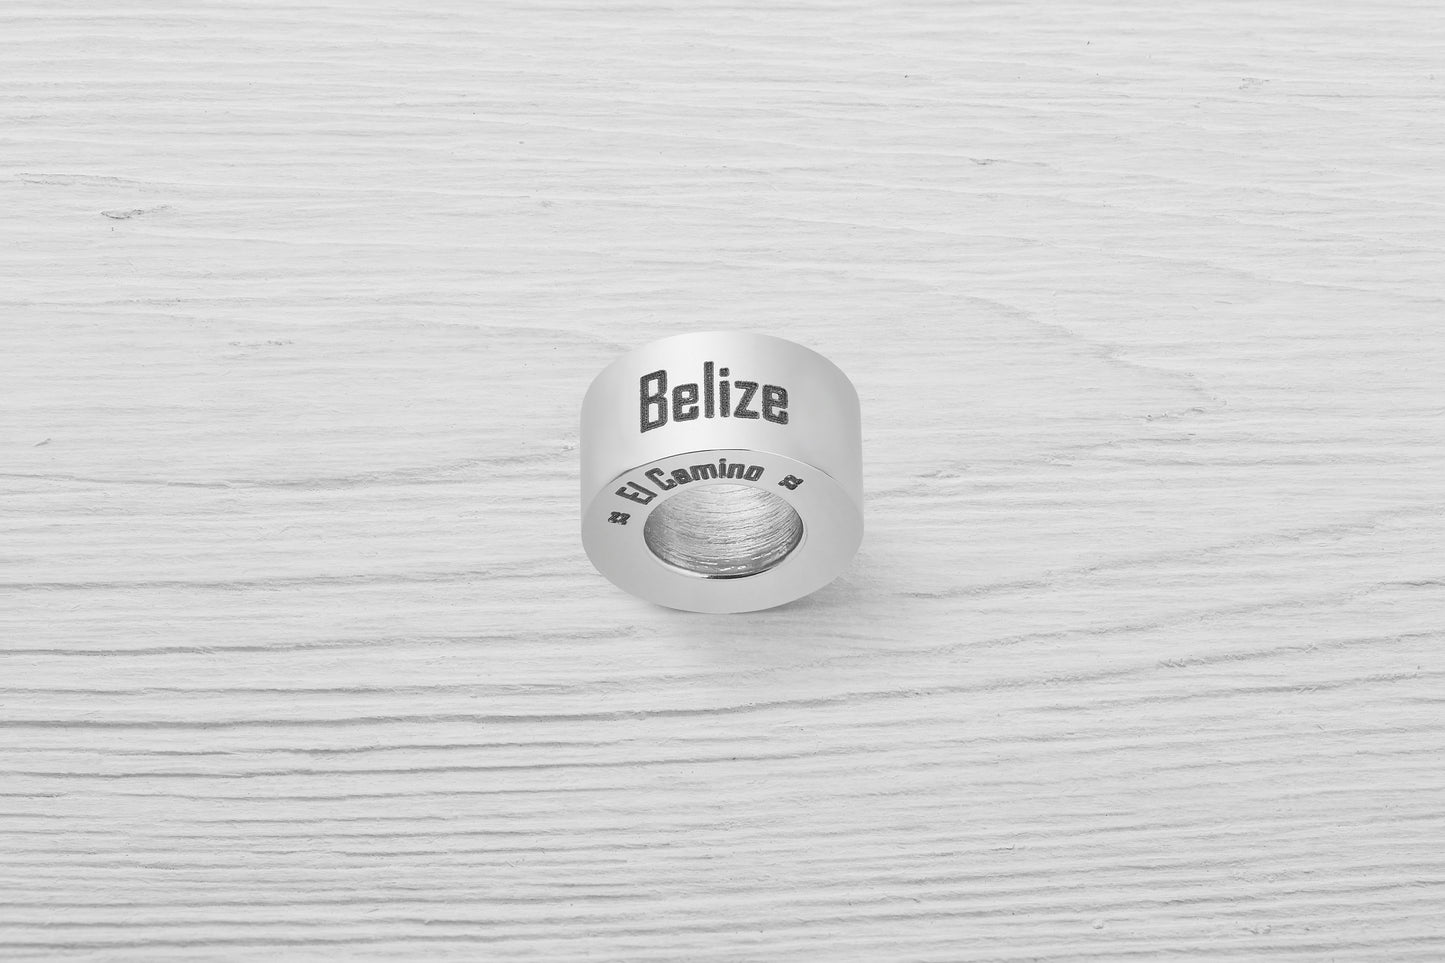 El Camino Belize Country Step Travel Charm Bead